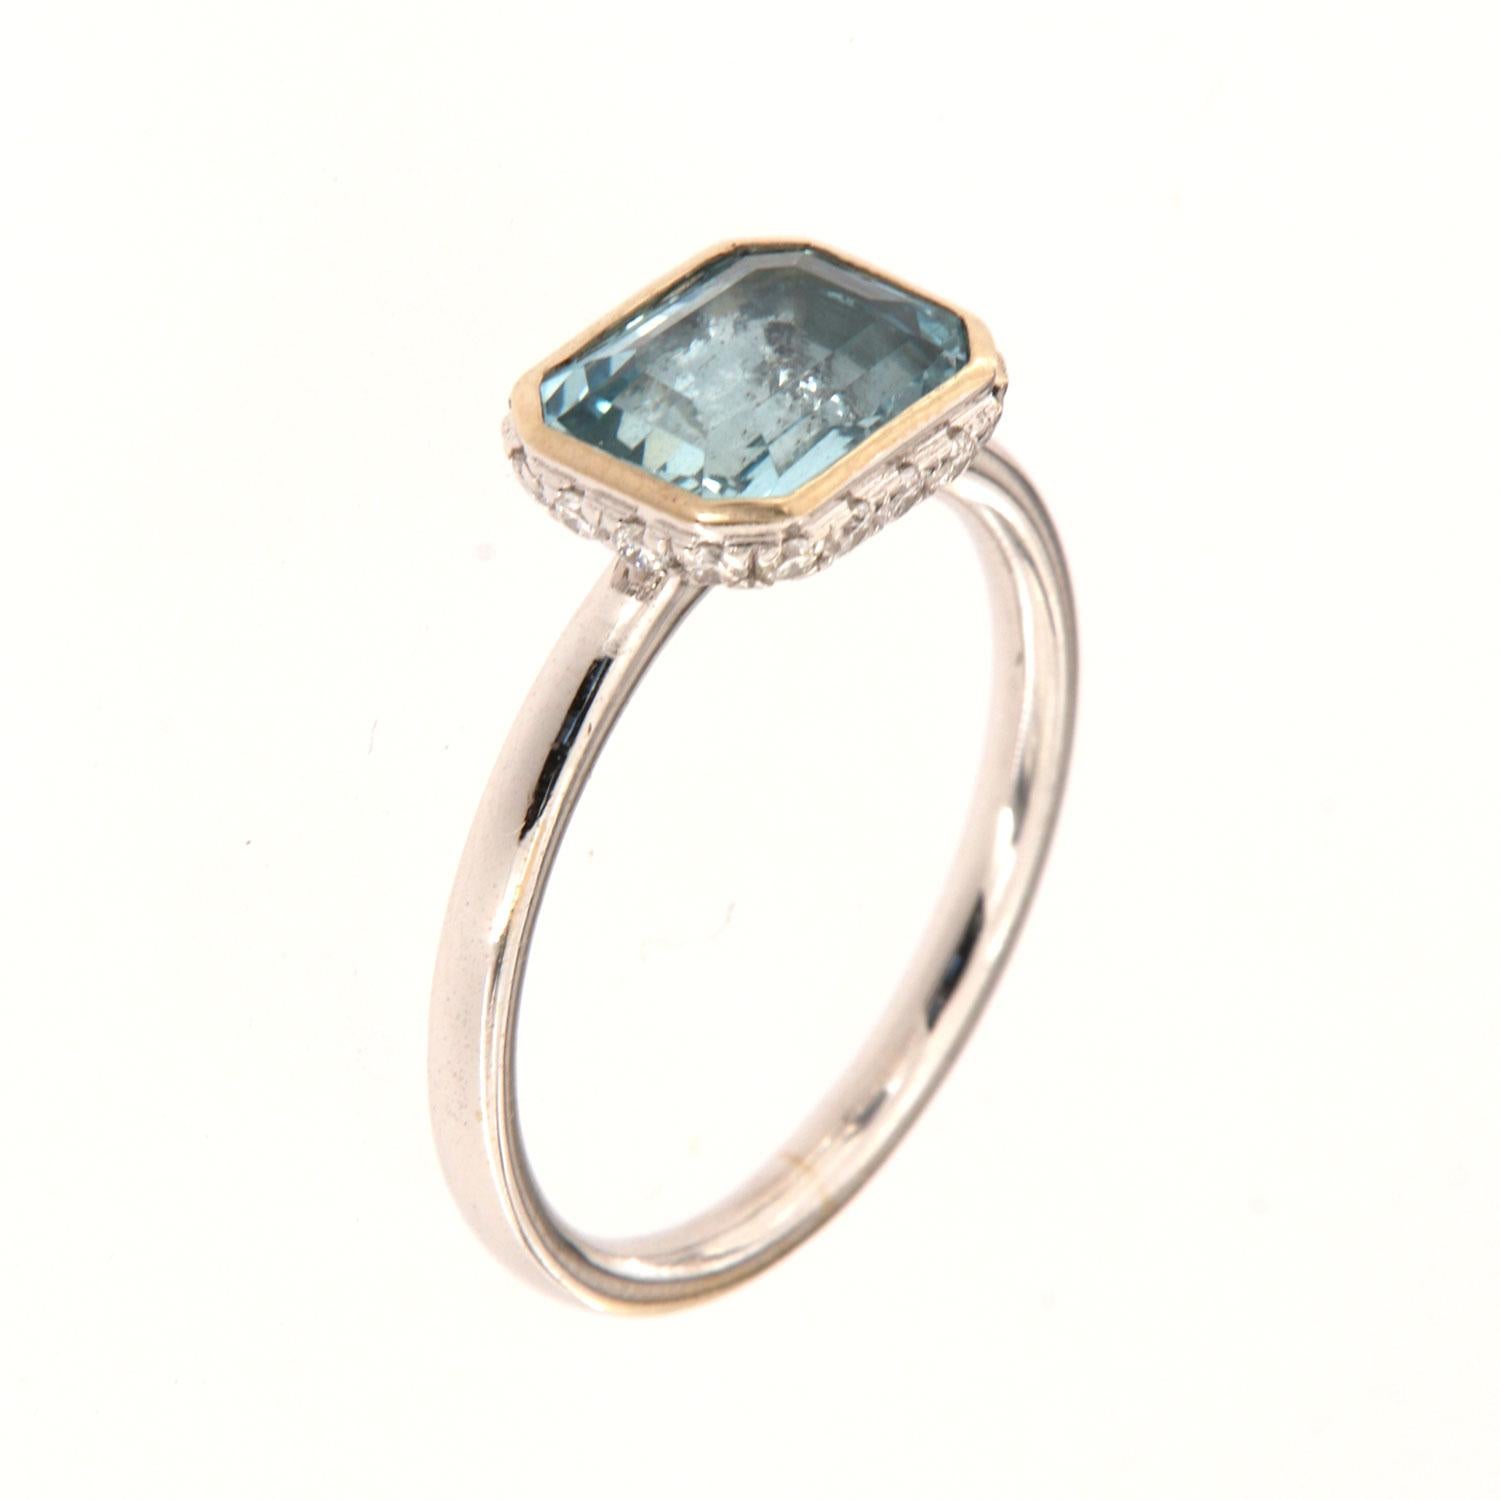 This 14k White gold delicate ring features a 1.70 Carat Blue Aquamarine emerald cut bezel set East-West style. Sixteen (16)Brilliant round diamonds are micro-prong set in a hidden halo on the crown to create the sparkle look every woman is looking